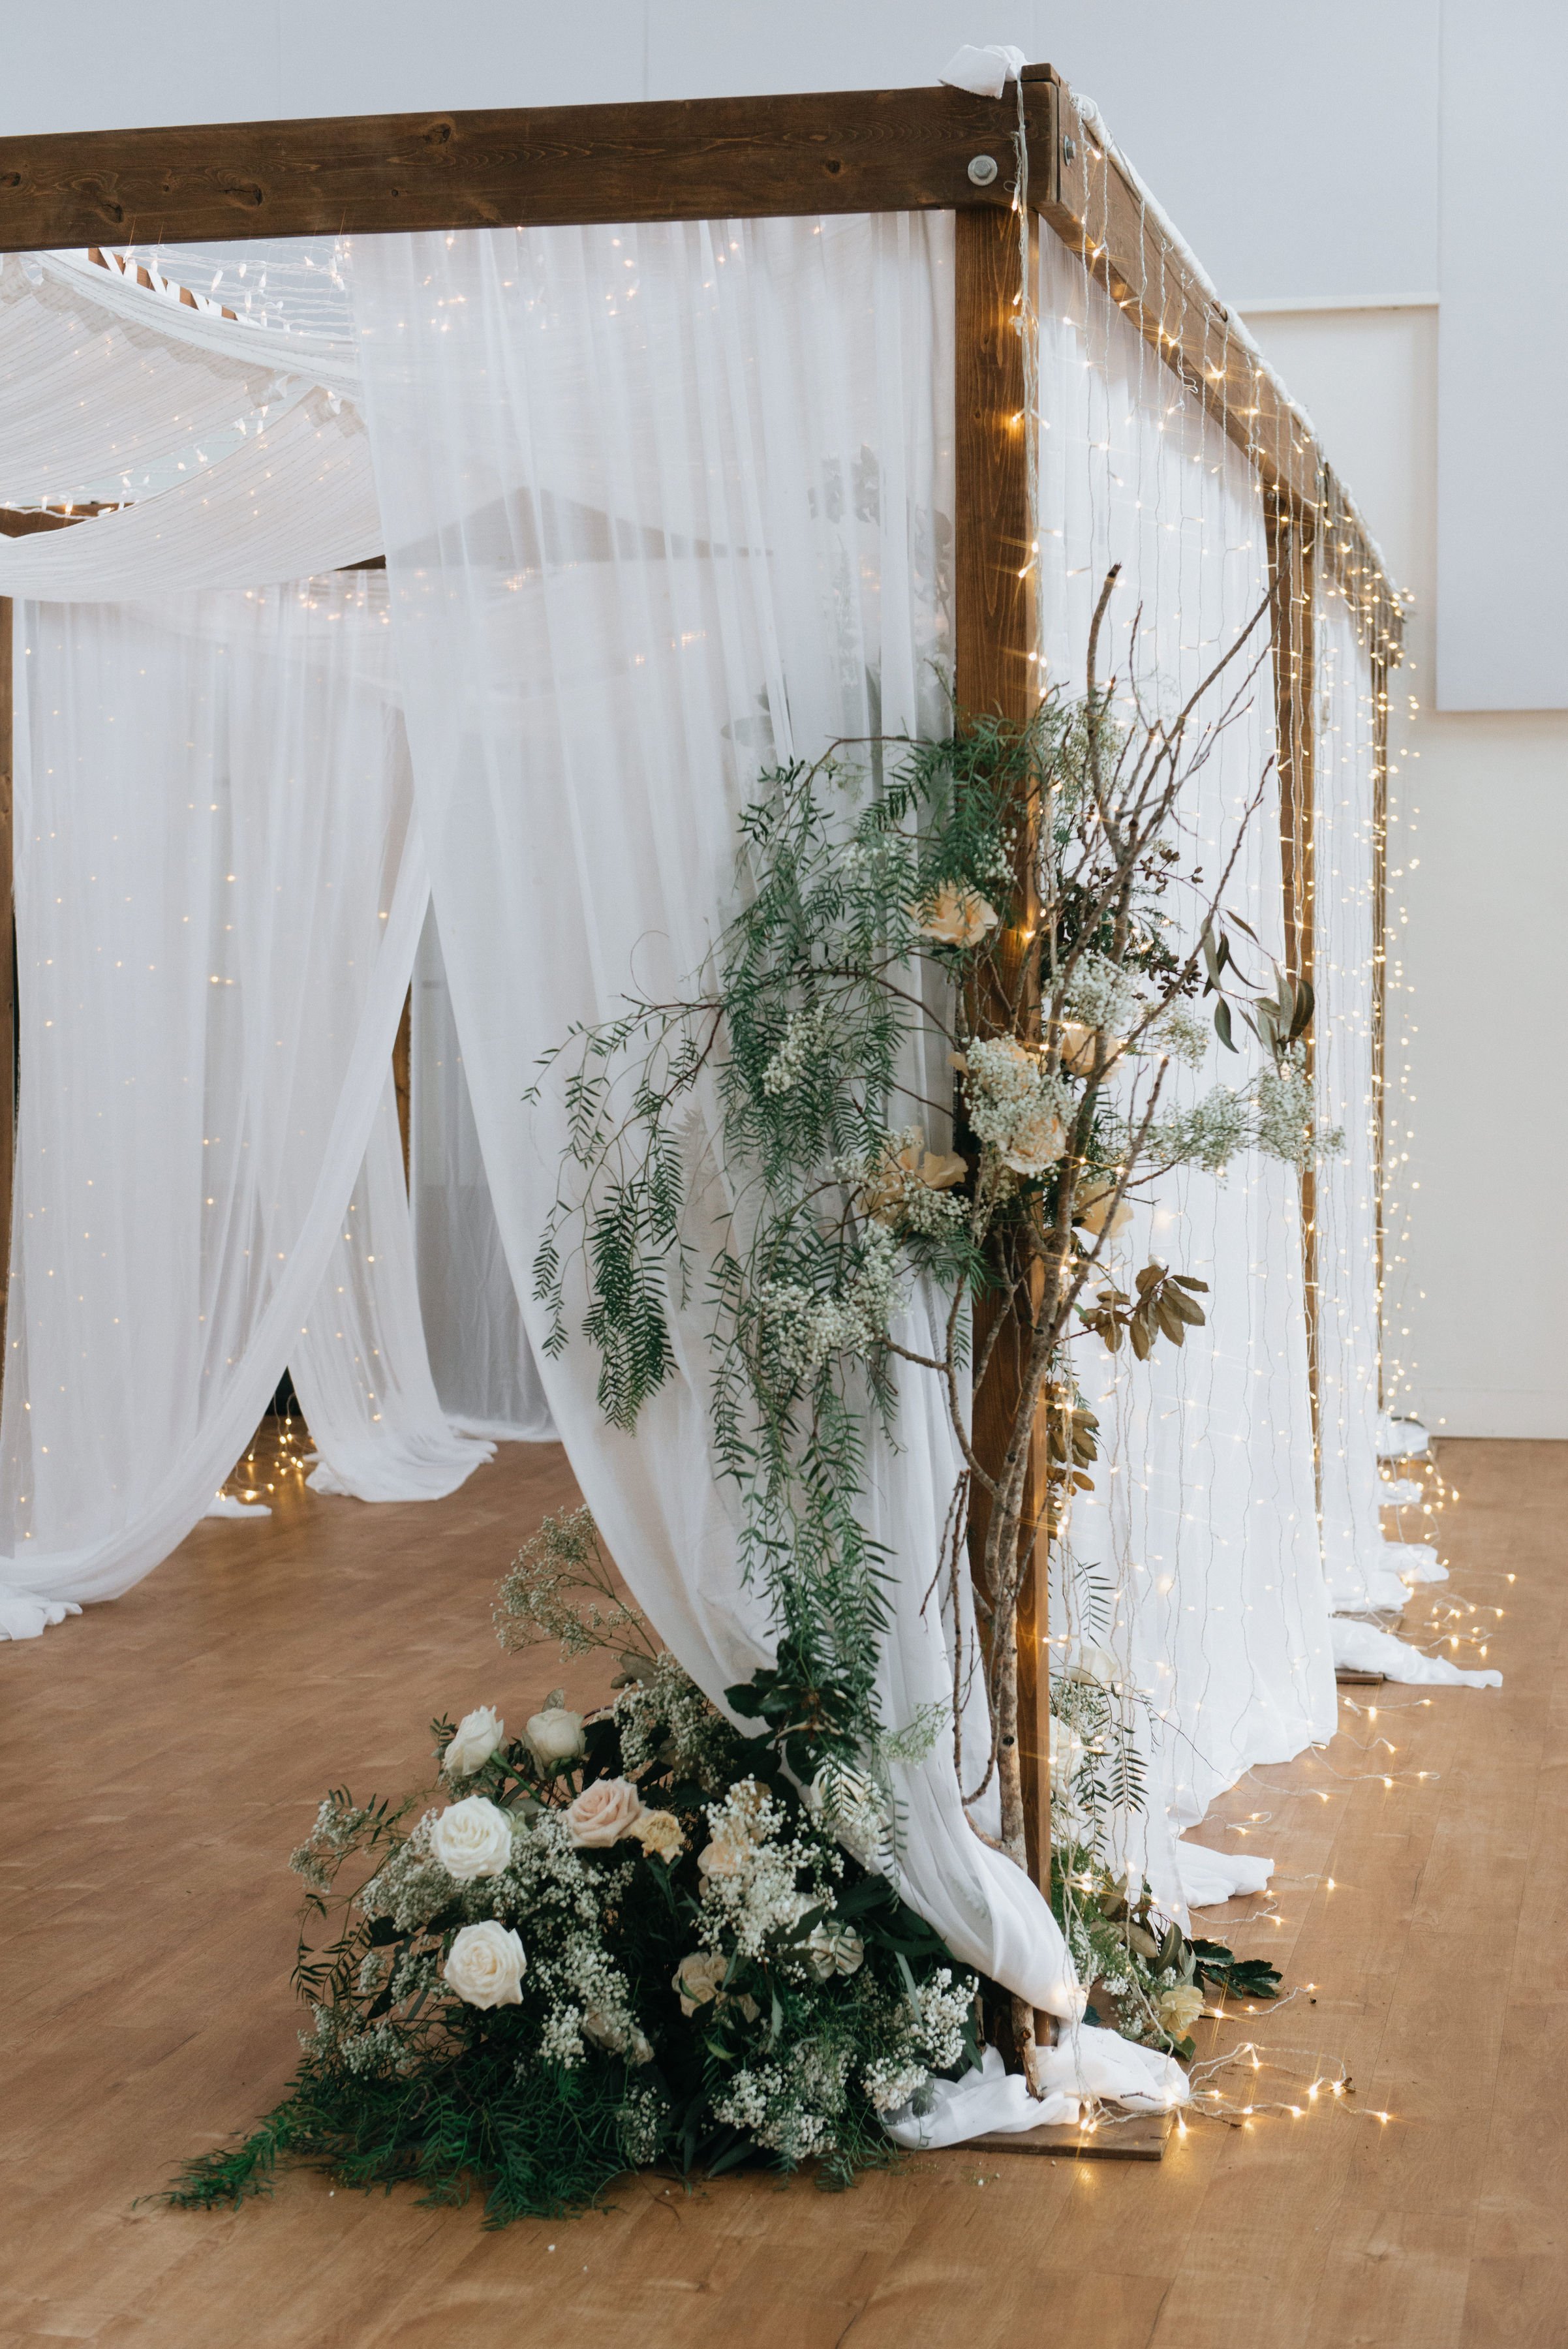  The gals transformed the entrance from our foyer into the main space with a canopy of twinkle lights and floral arrangements to die for.  